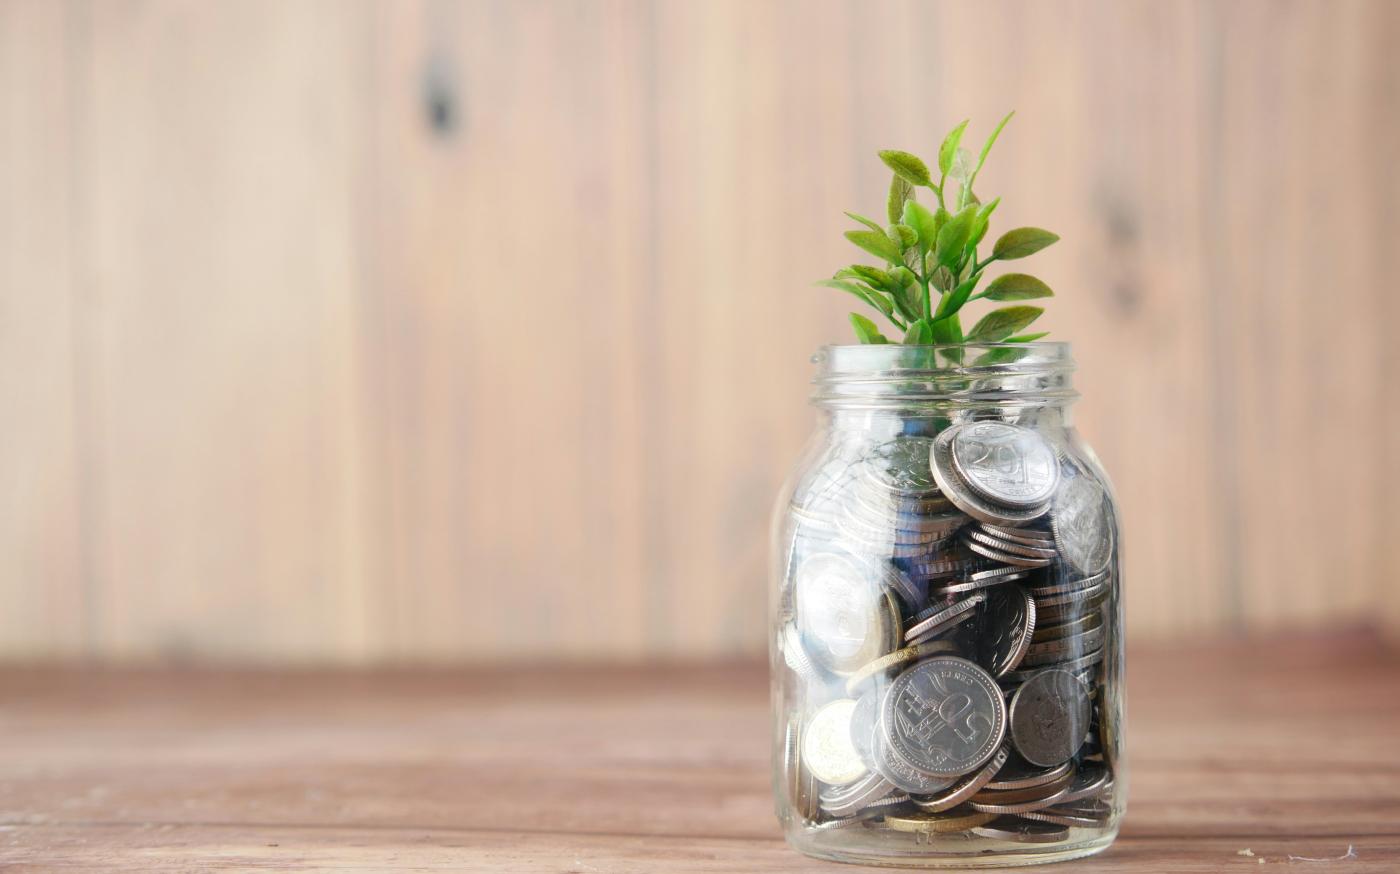 a glass jar filled with coins and a plant by Towfiqu barbhuiya courtesy of Unsplash.